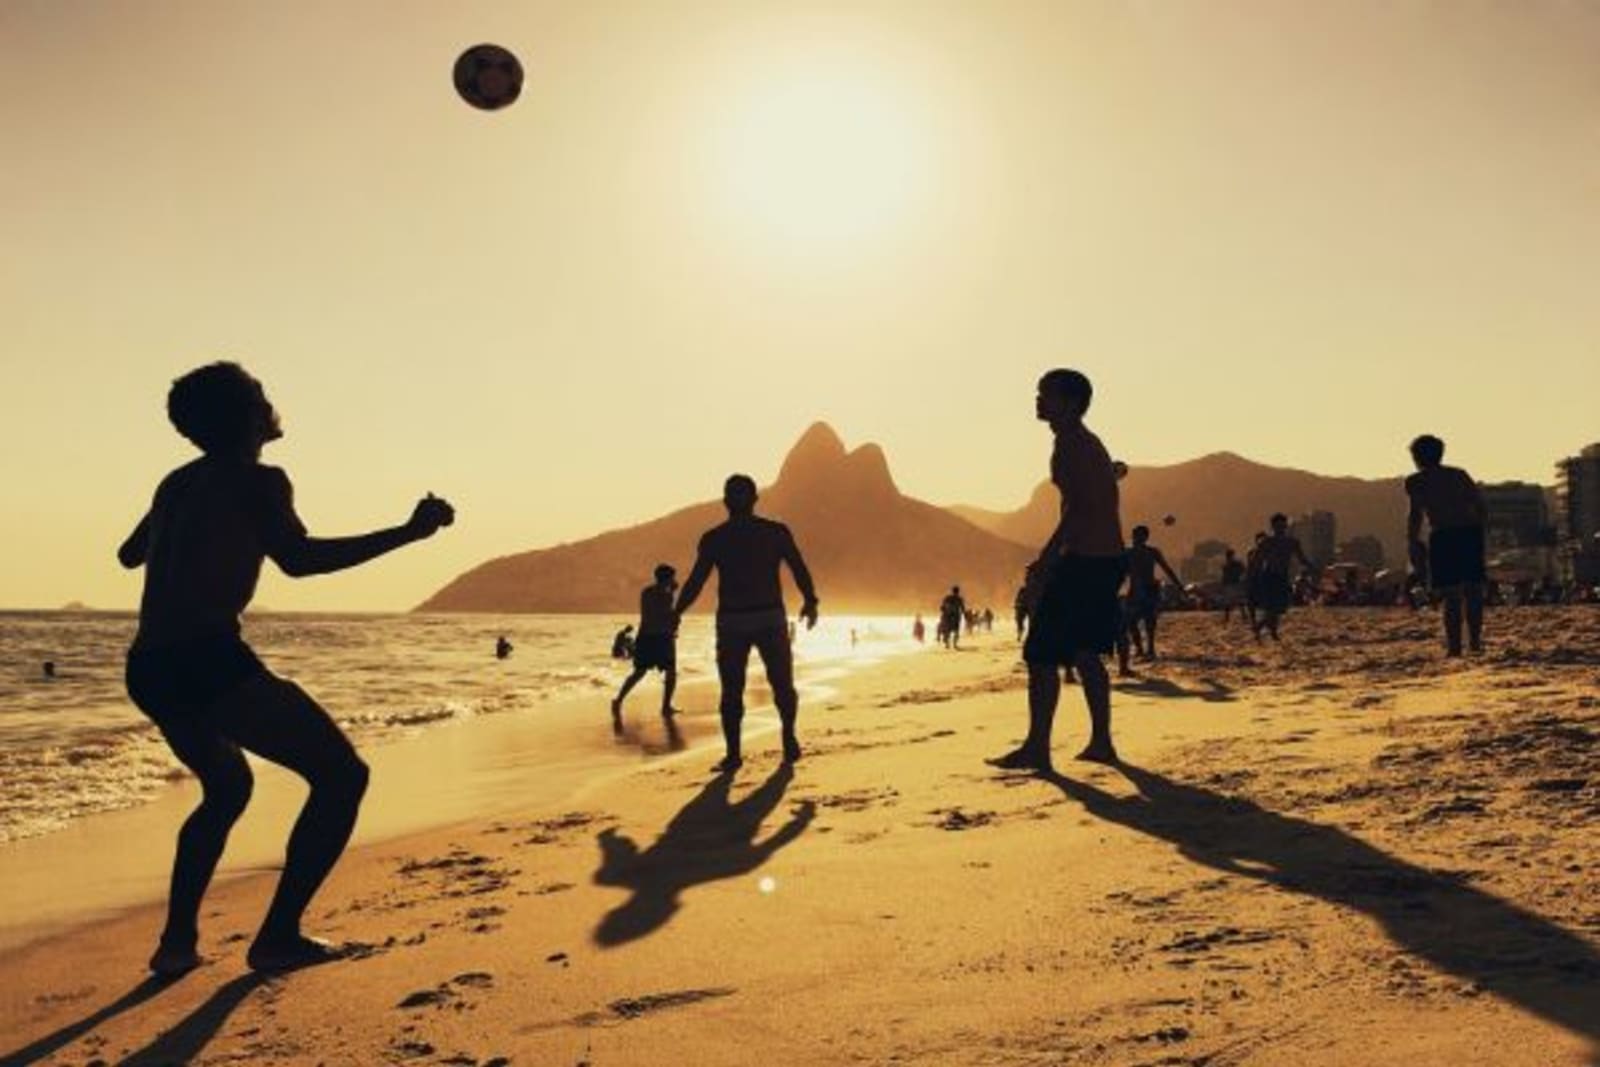 People playing soccer on a beach during sunset